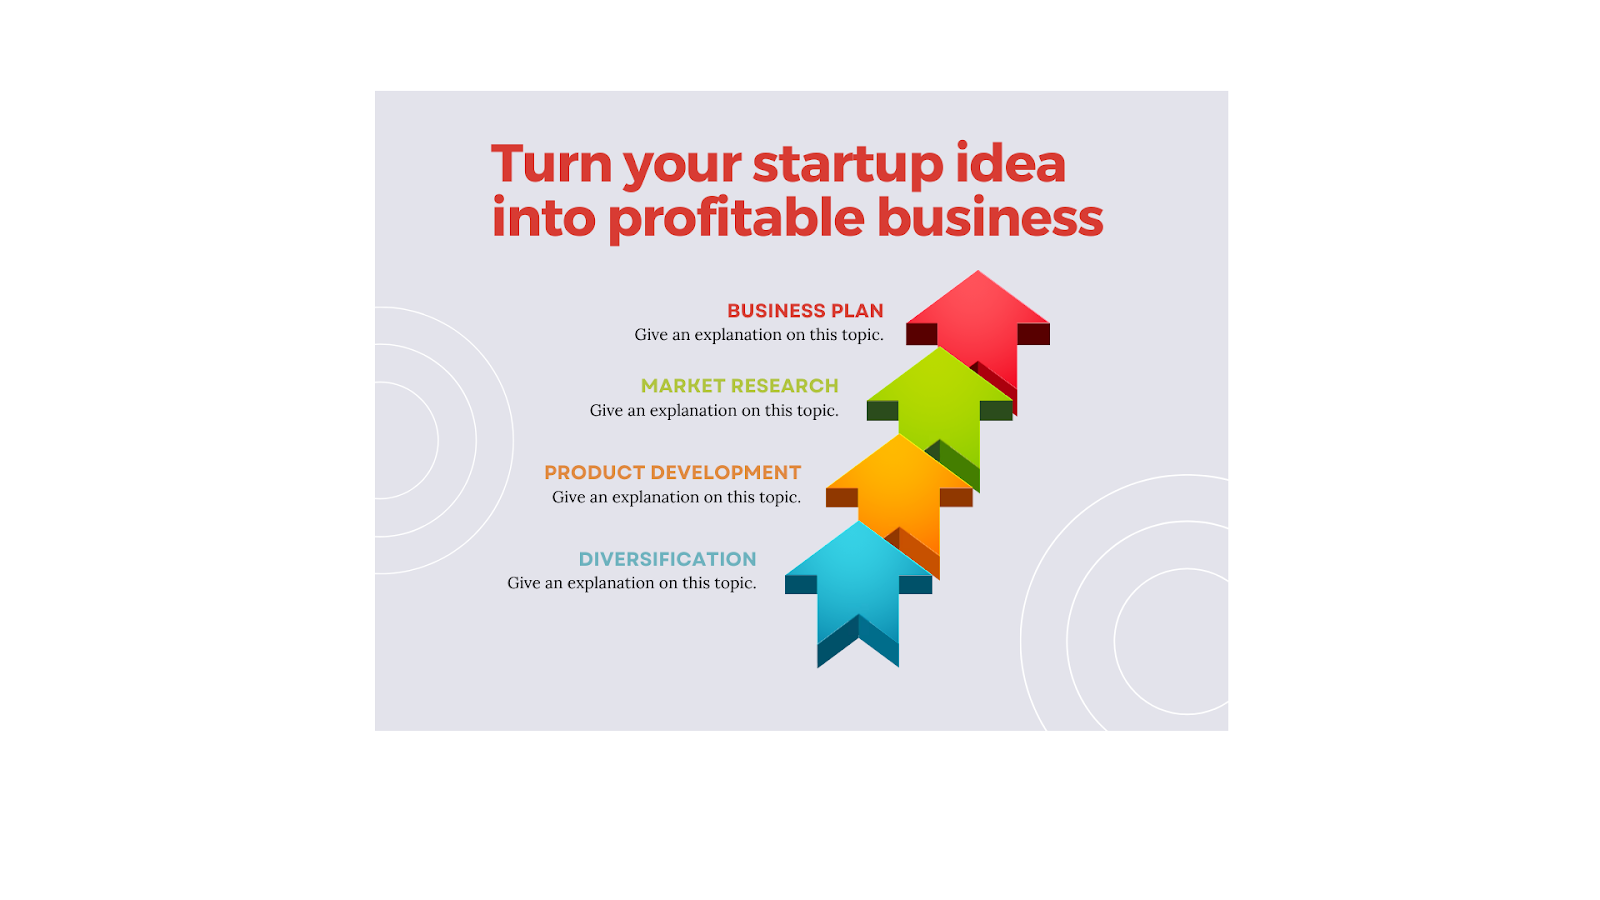 Turn your startup idea into profitable business.